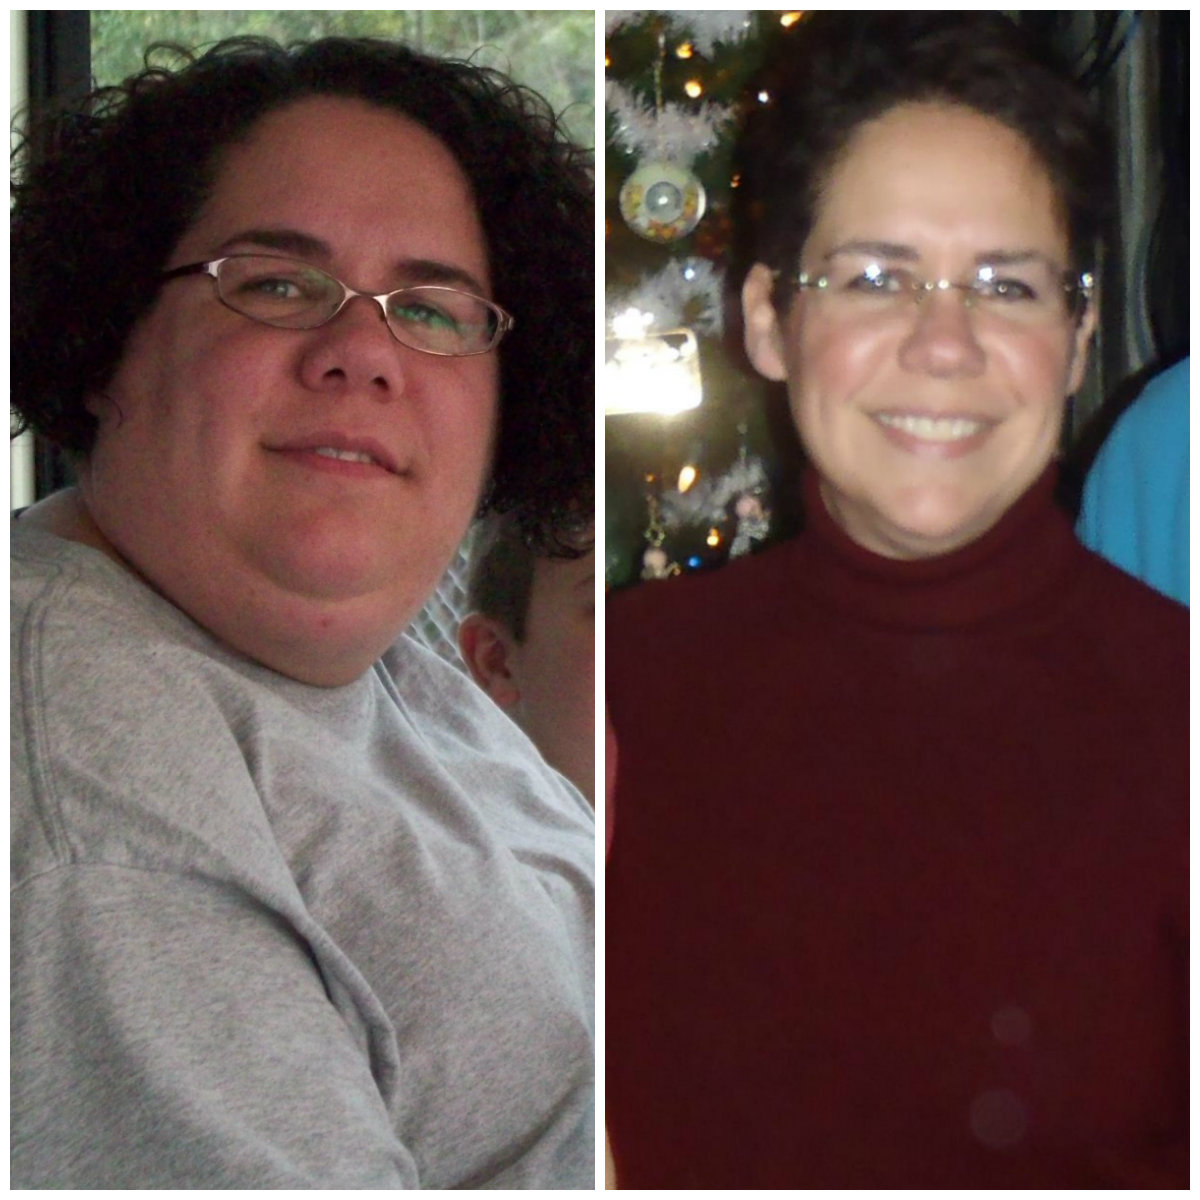 http://www.beliteweight.com/blog/wp-content/uploads/2013/02/Marlee-Before-and-After-Gastric-Sleeve-Surgery.jpg